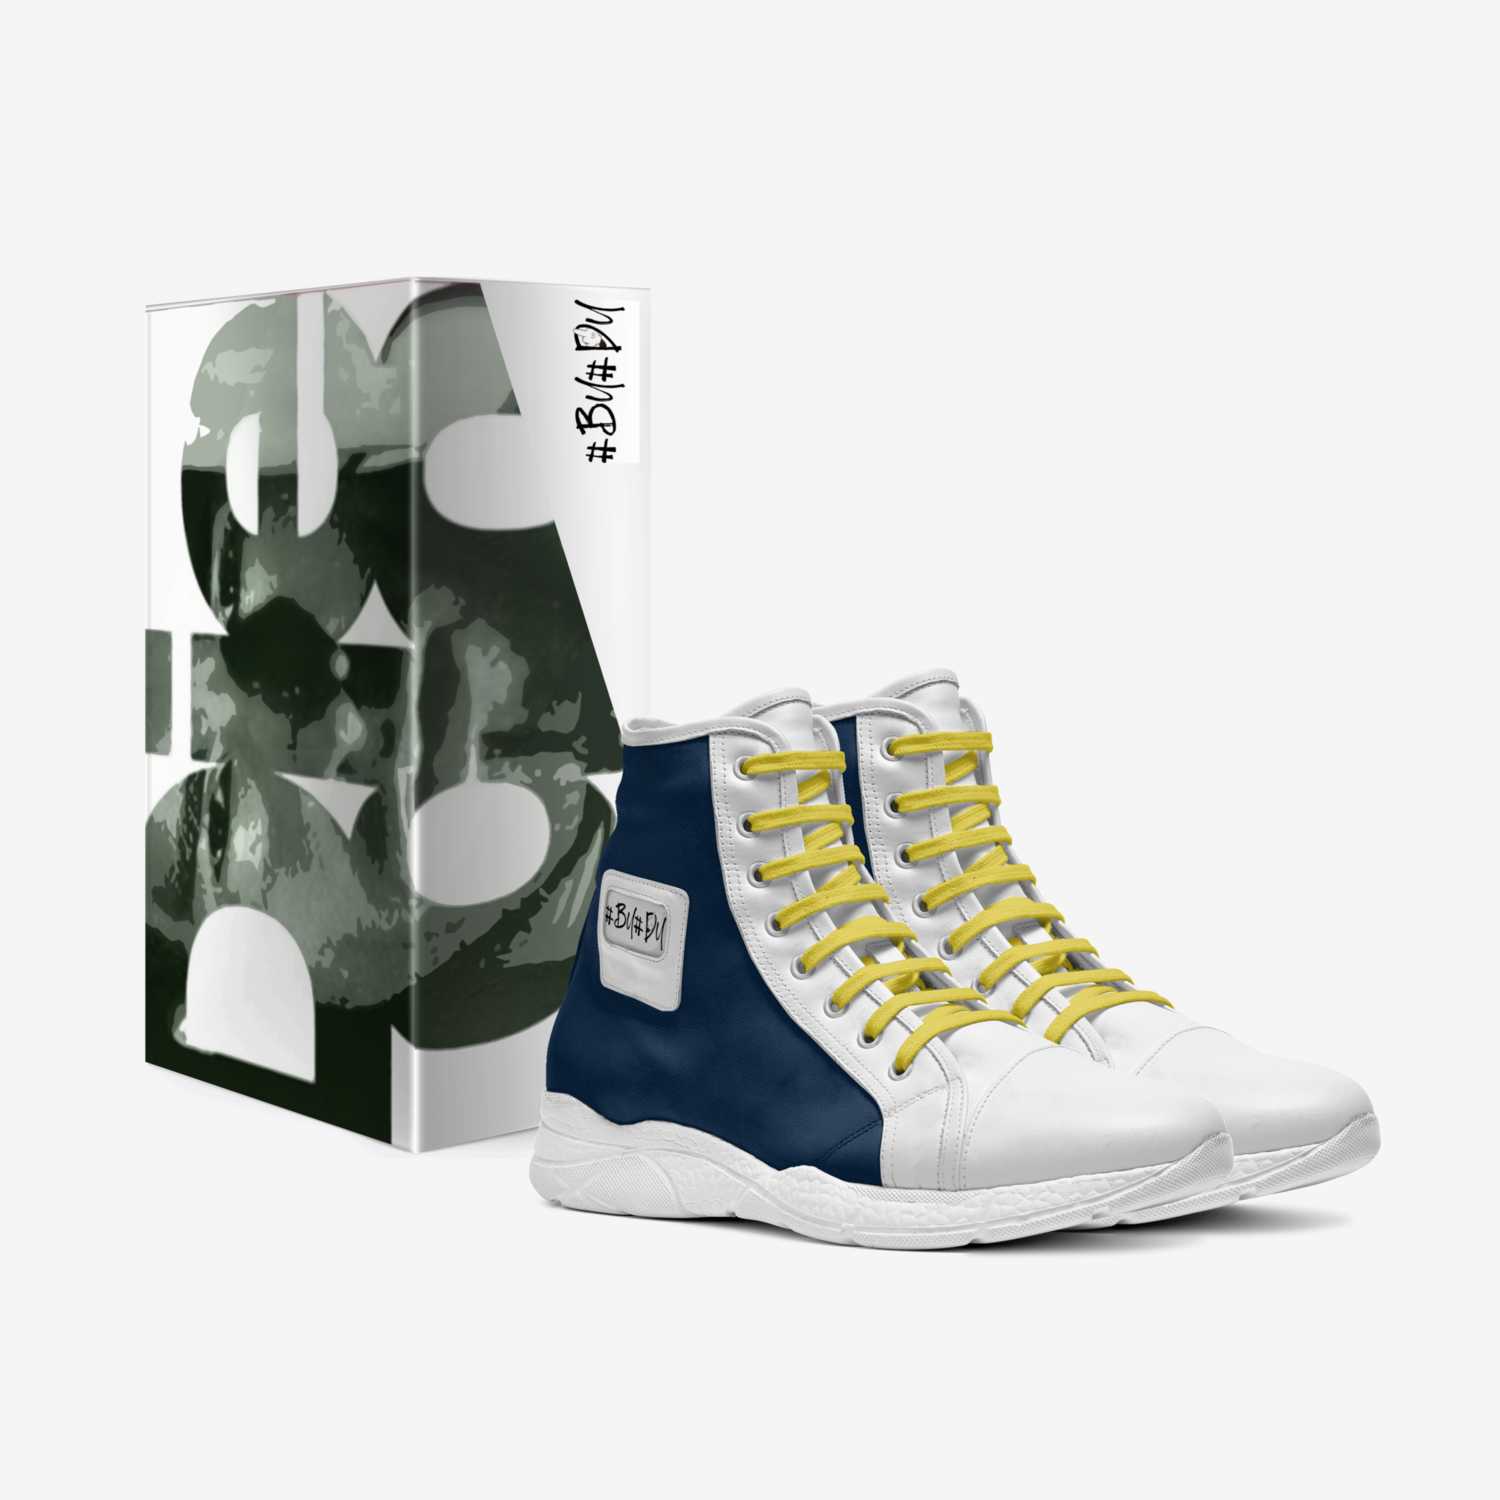 #BU#DU custom made in Italy shoes by Diego Valdez | Box view